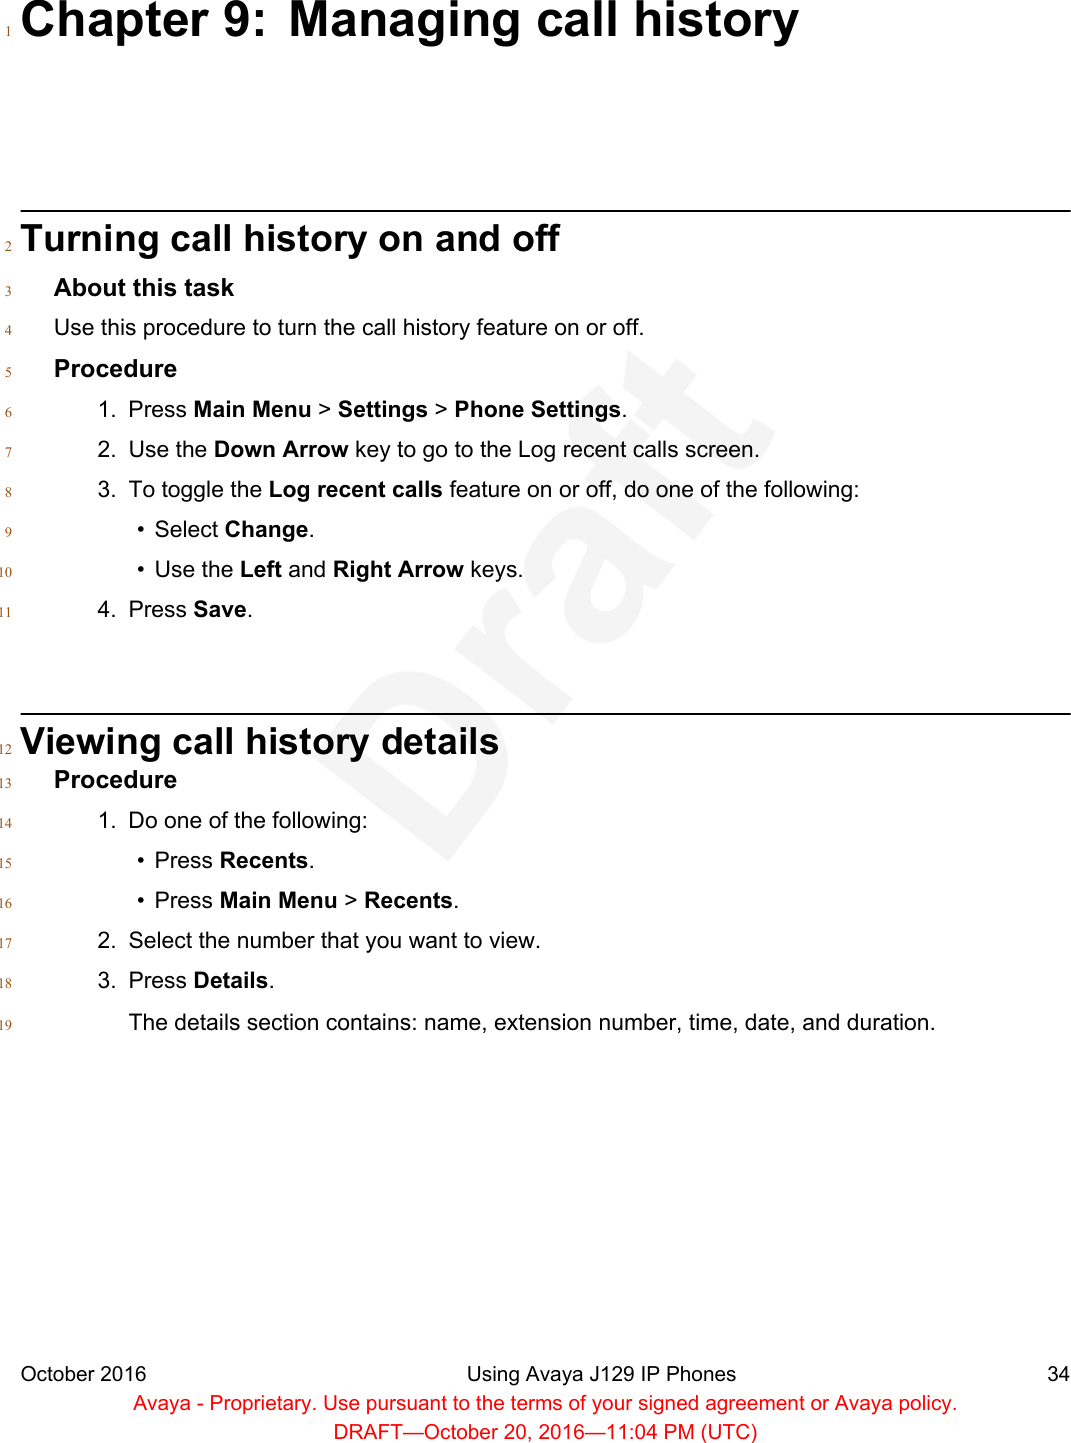 Chapter 9: Managing call history1Turning call history on and off2About this task3Use this procedure to turn the call history feature on or off.4Procedure51. Press Main Menu &gt; Settings &gt; Phone Settings.62. Use the Down Arrow key to go to the Log recent calls screen.73. To toggle the Log recent calls feature on or off, do one of the following:8• Select Change.9• Use the Left and Right Arrow keys.104. Press Save.11Viewing call history details12Procedure131. Do one of the following:14• Press Recents.15• Press Main Menu &gt; Recents.162. Select the number that you want to view.173. Press Details.18The details section contains: name, extension number, time, date, and duration.19October 2016 Using Avaya J129 IP Phones 34Avaya - Proprietary. Use pursuant to the terms of your signed agreement or Avaya policy.DRAFT—October 20, 2016—11:04 PM (UTC)